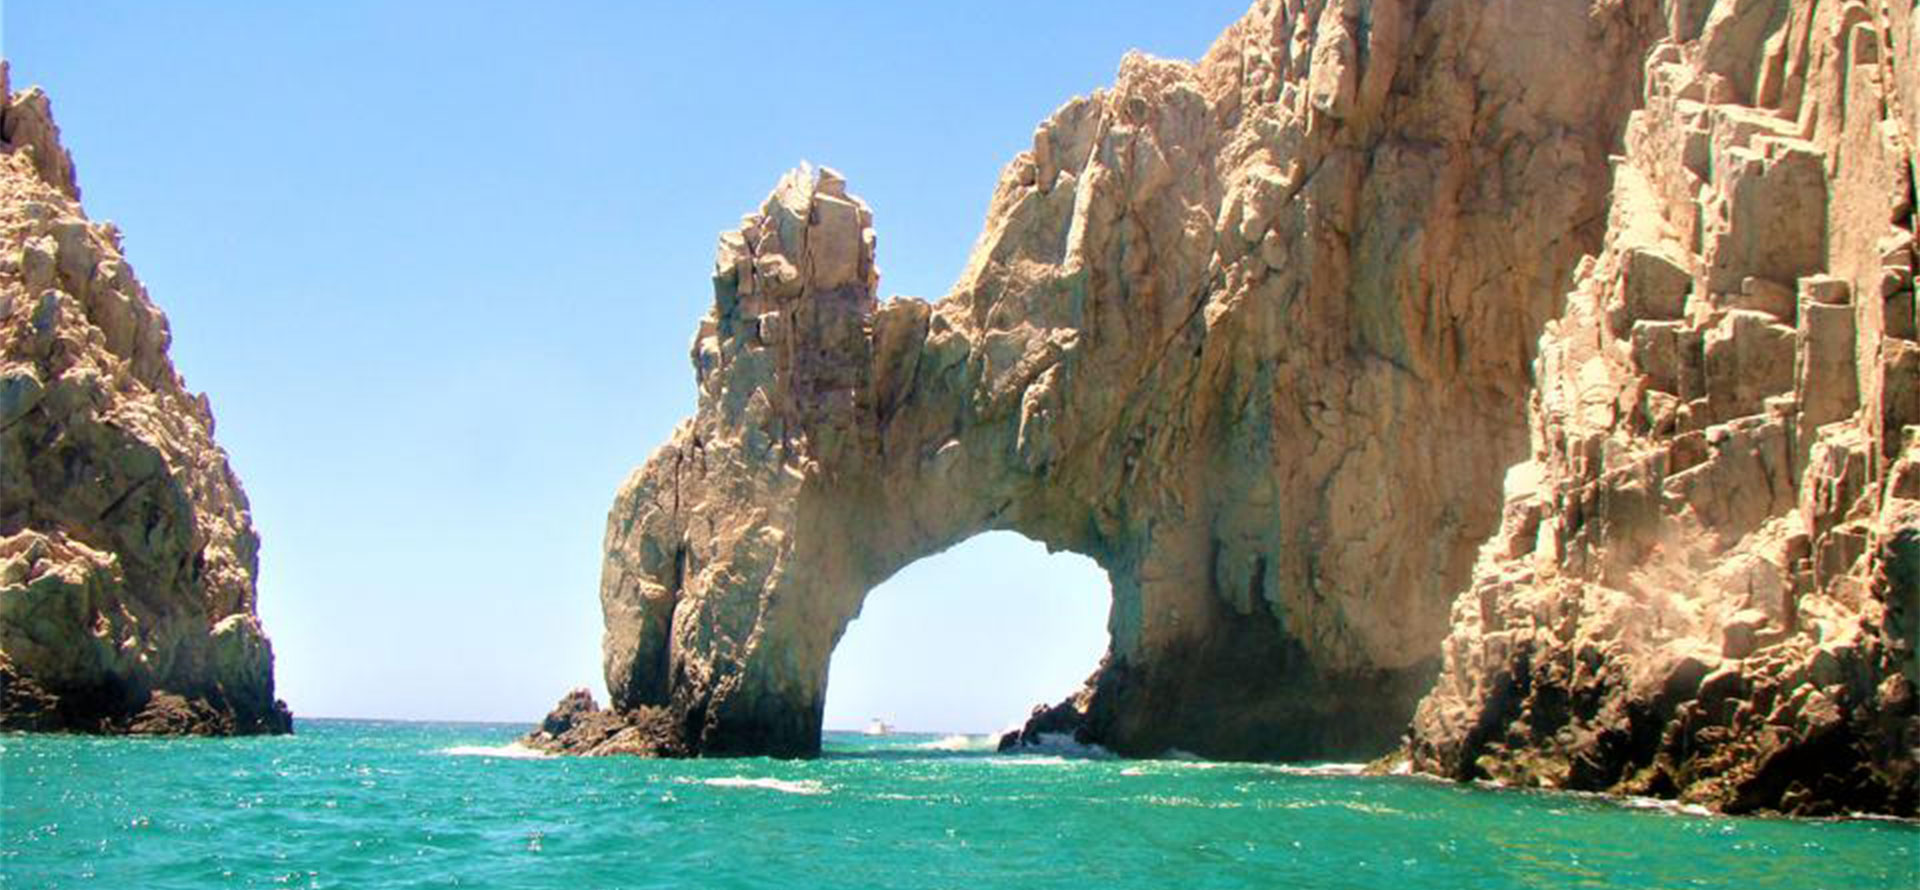 All inclusive adults only resort at Cabo with rocks.